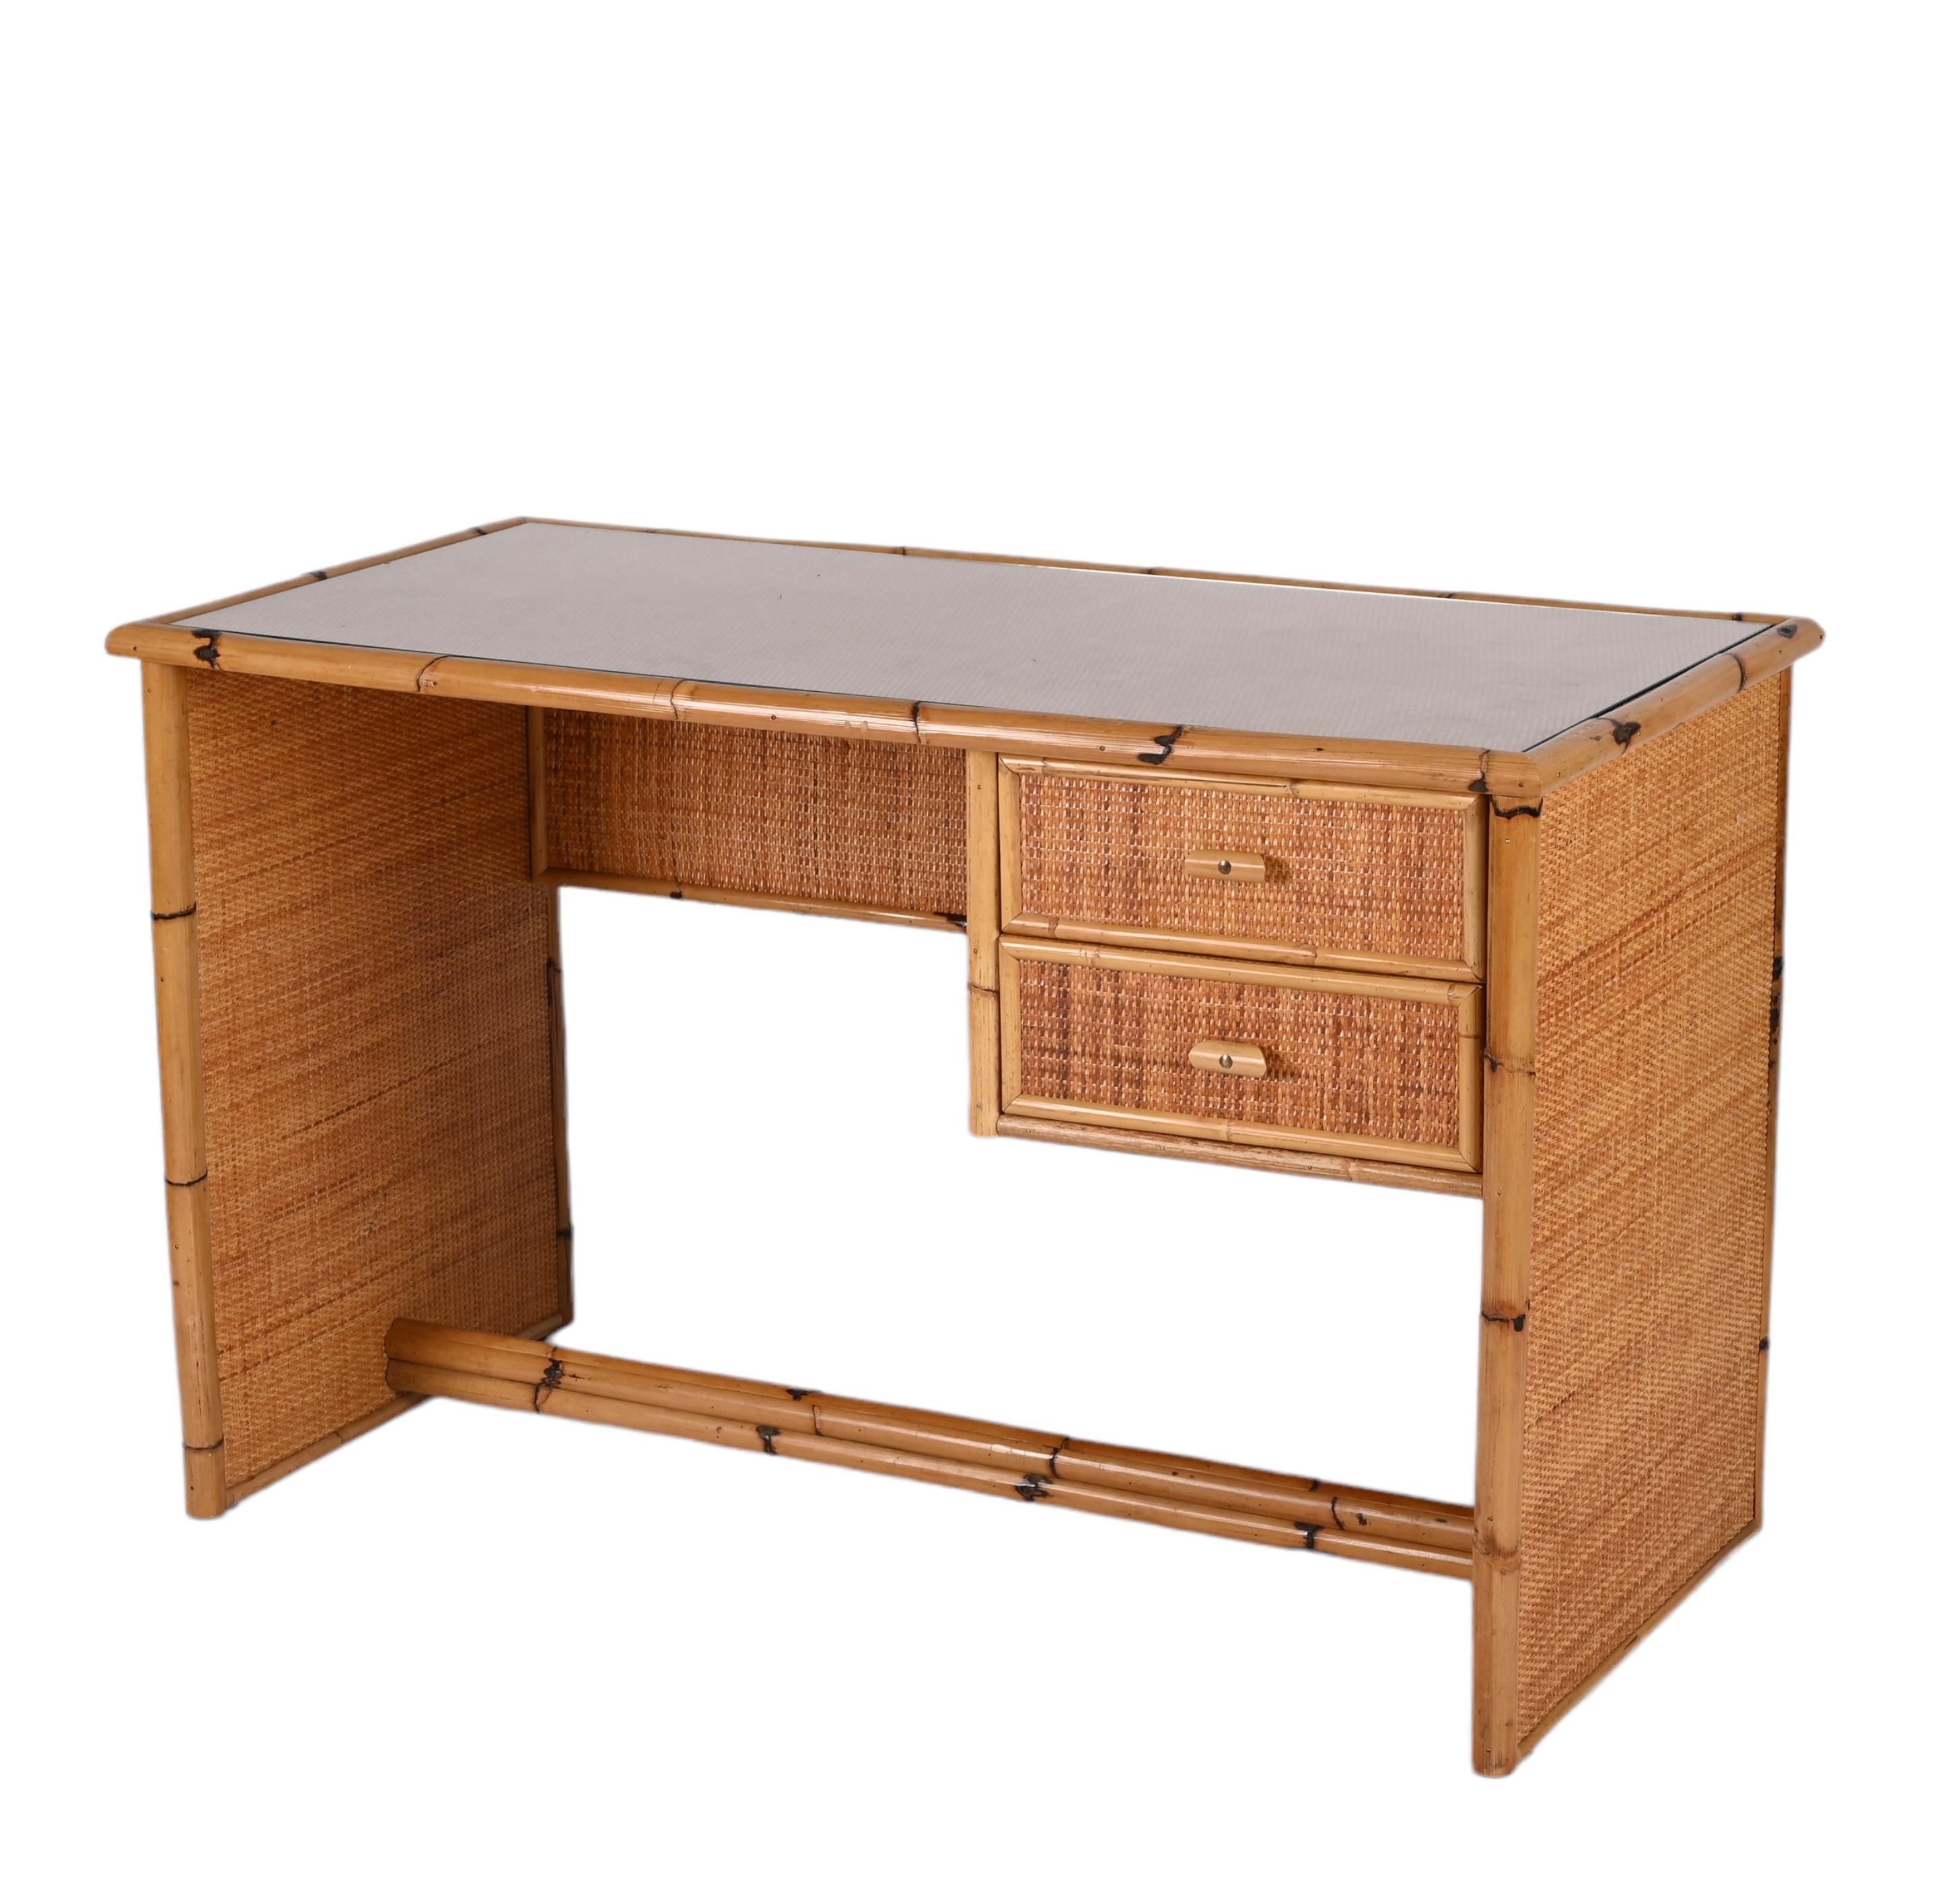 Mid-Century Modern Midcentury Glass Top, Bamboo and Wicker Italian Desk with Drawers, 1980s For Sale